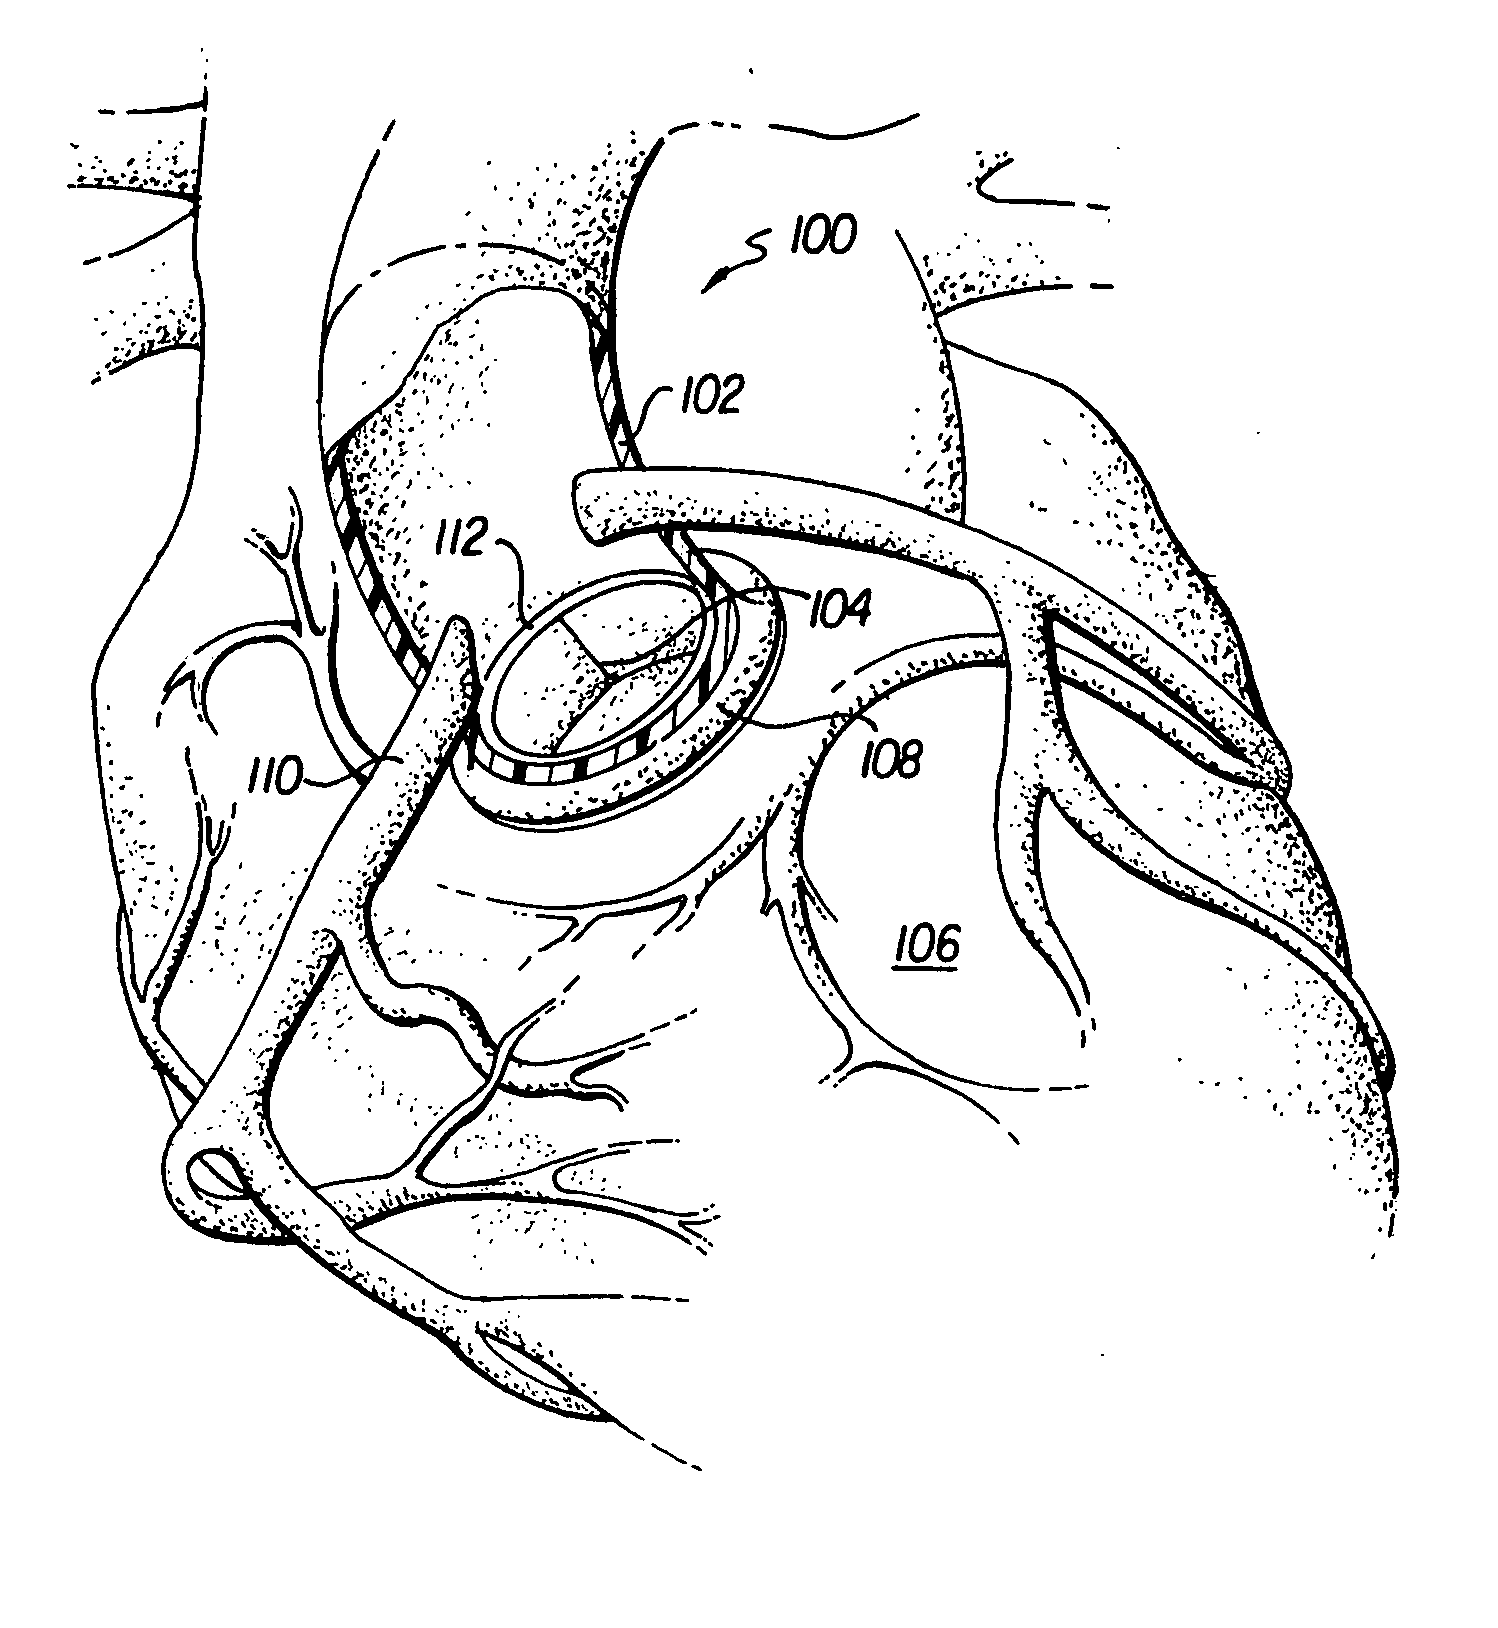 Heart model for training or demonstrating heart valve replacement or repair